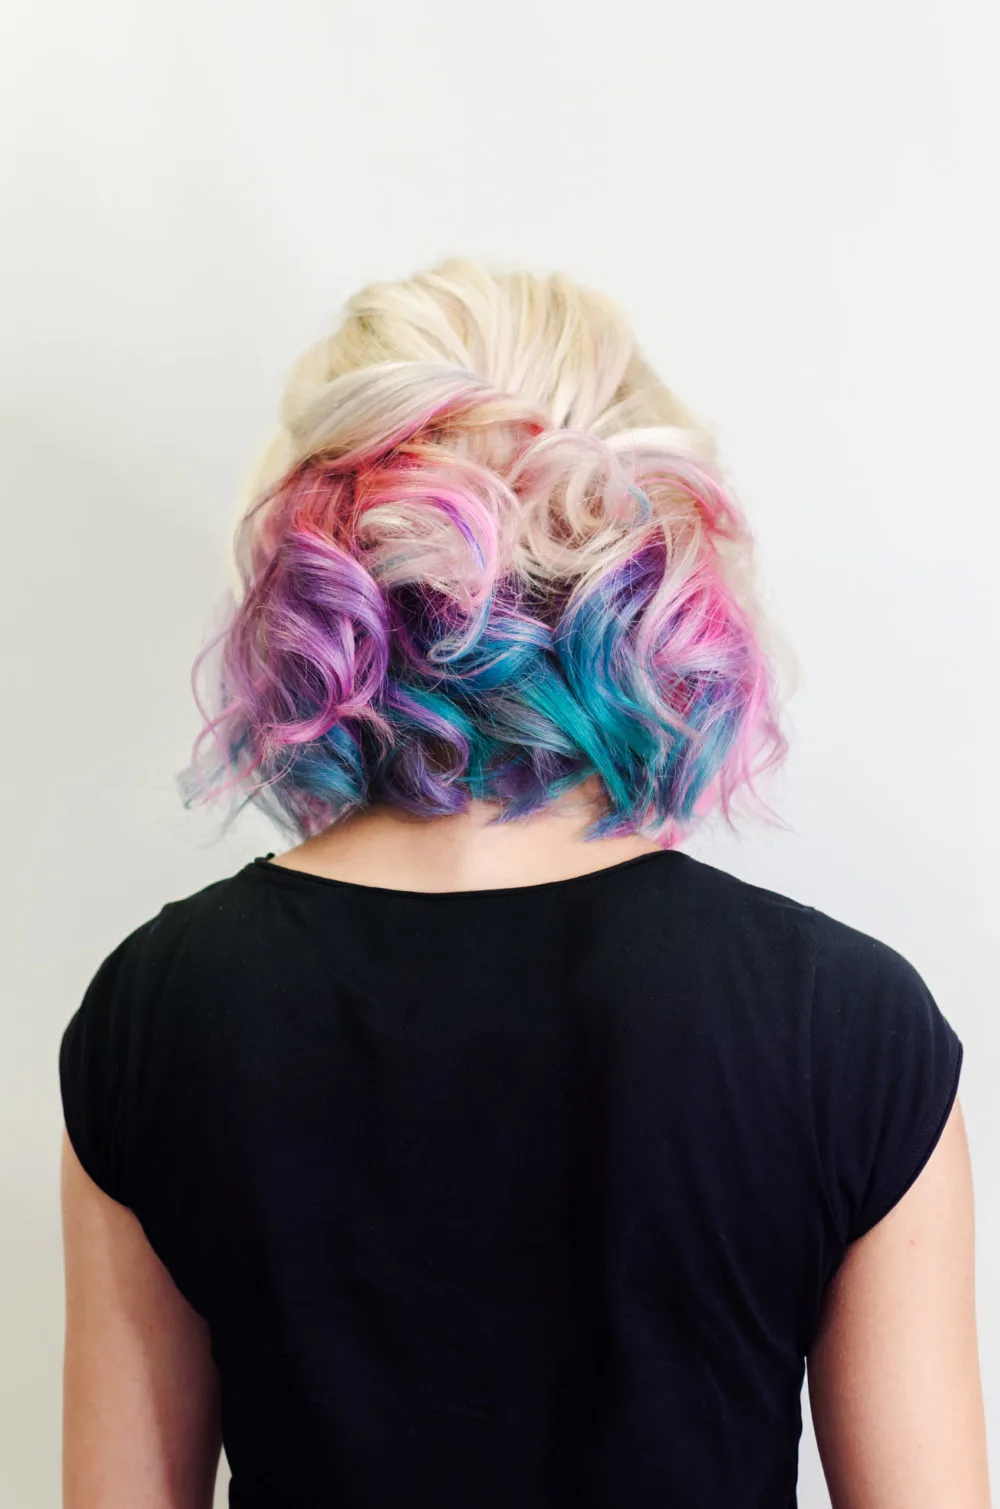 Lilac, Aquamarine, and Platinum Blonde multi colored hair ideas on a woman in a black shirt